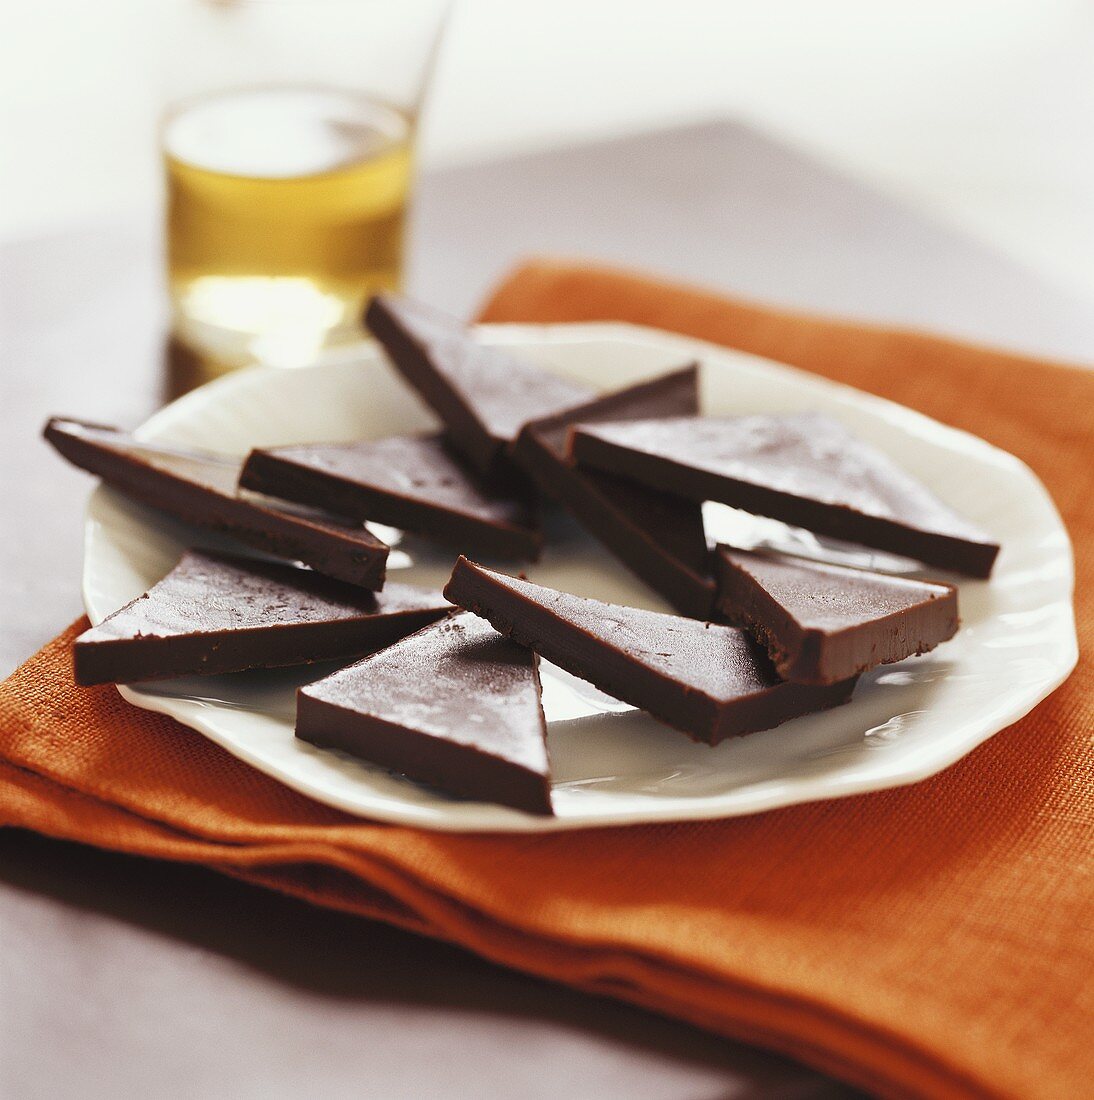 Chocolate triangles on plate